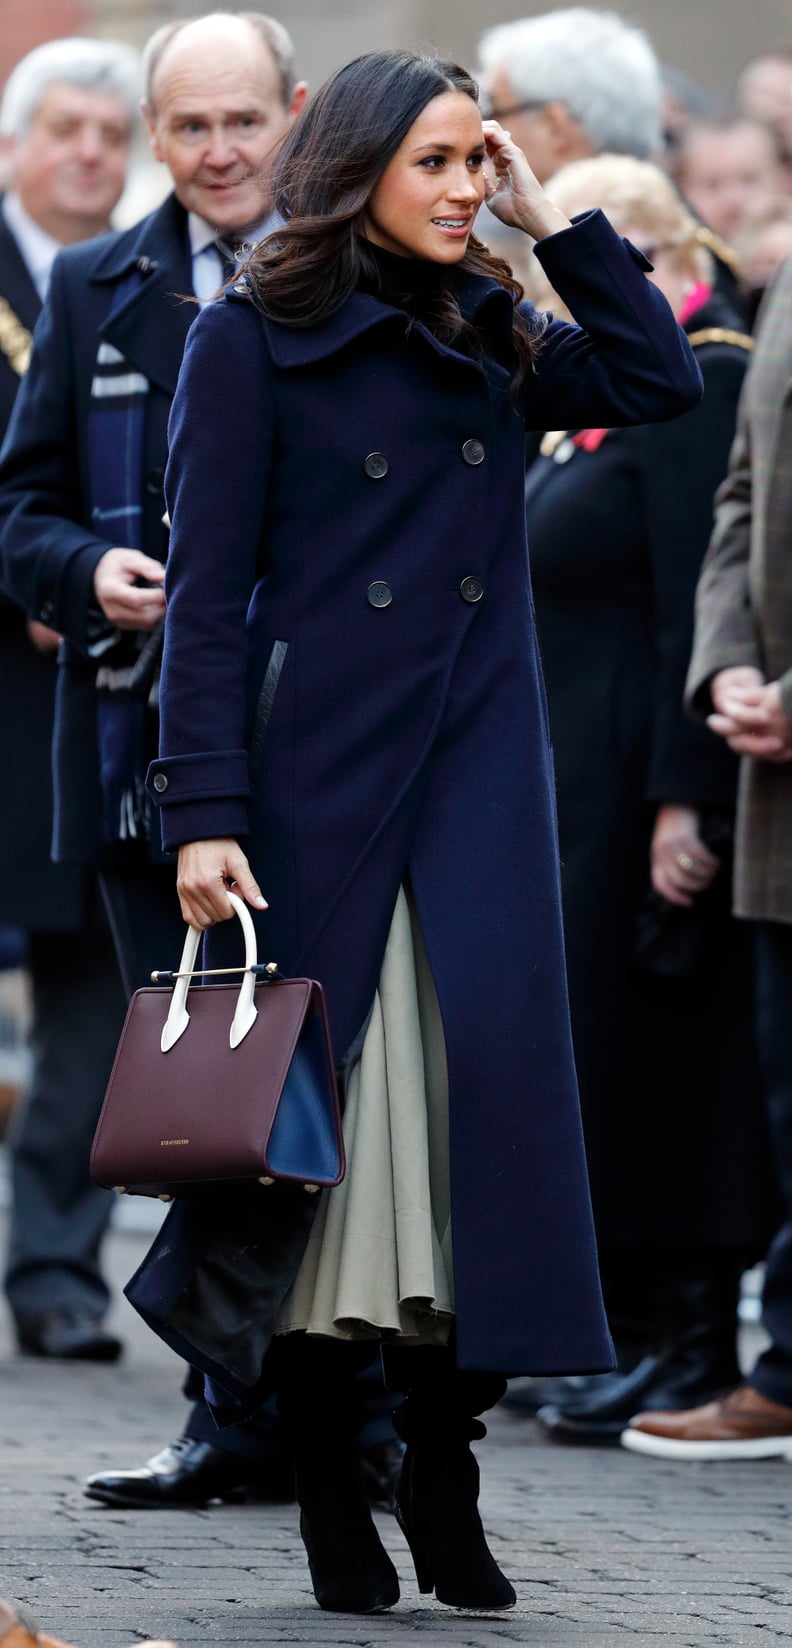 ‎Meghan Markle Carrying a Strathberry Midi Tote Bag in Tricolor